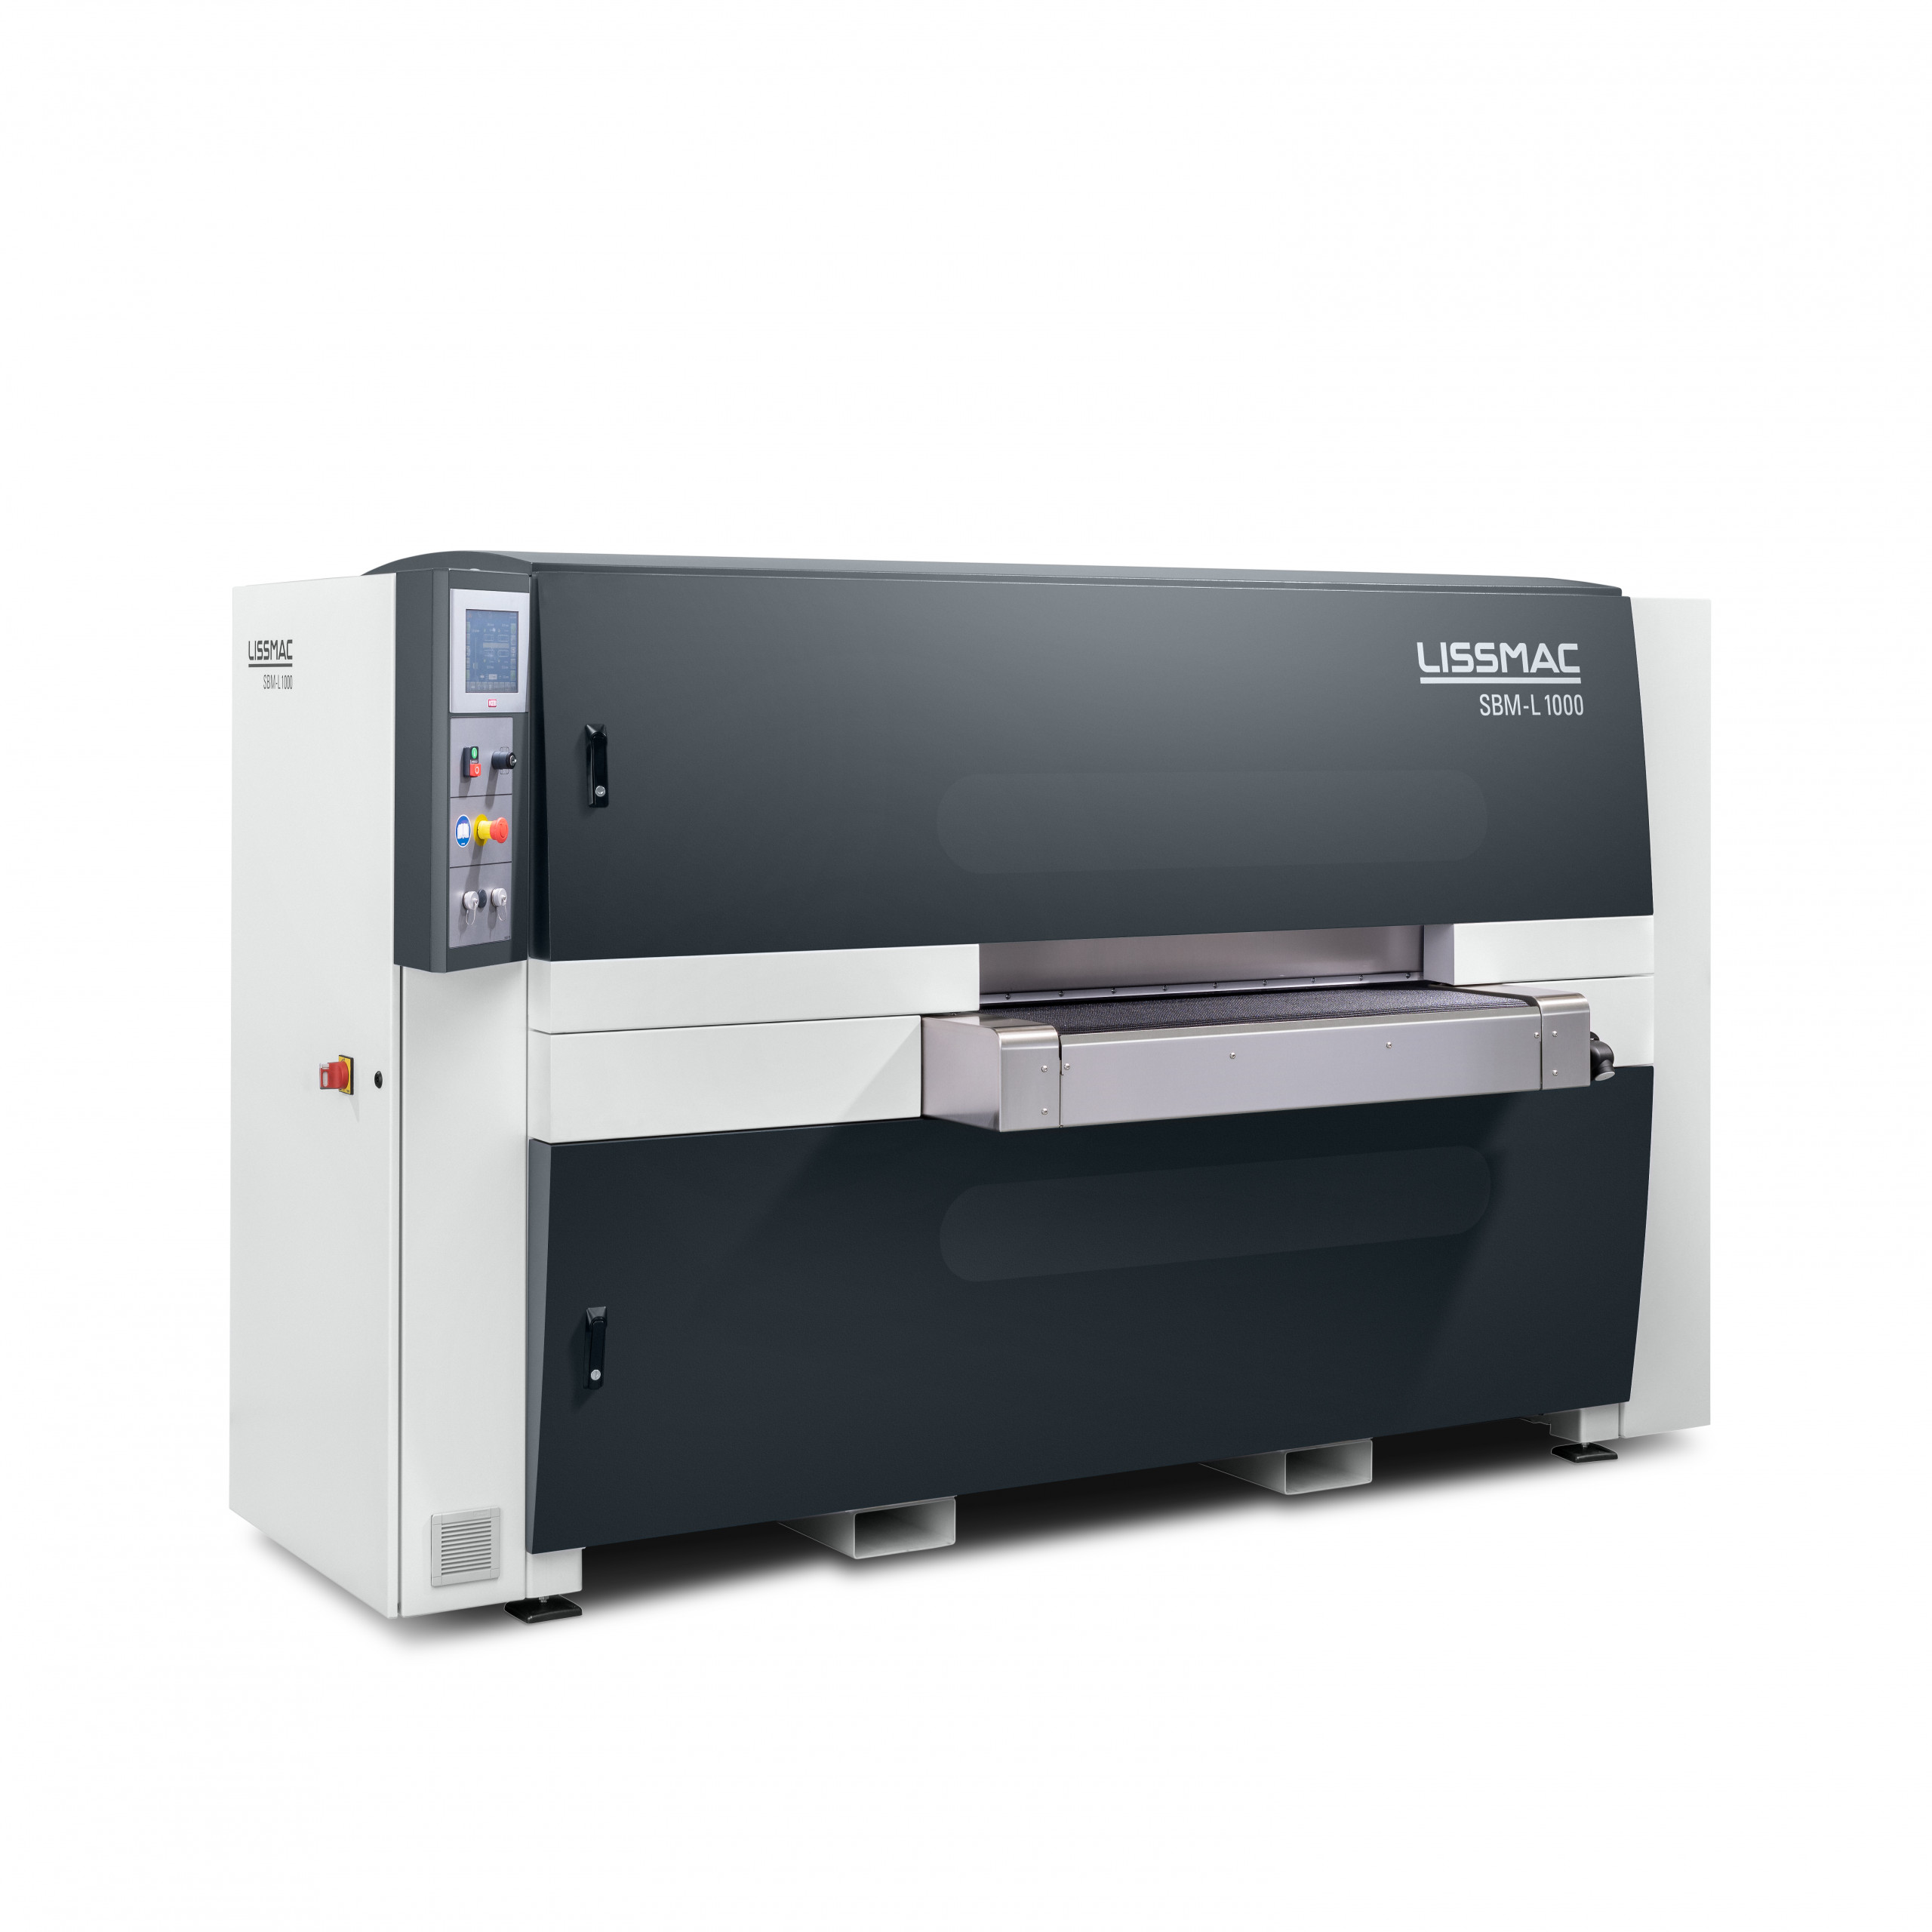 With the SBM-L 1000 G1S2 from Lissmac, steel, stainless steel and aluminum can be machined on both sides in just one operation using the dry process.